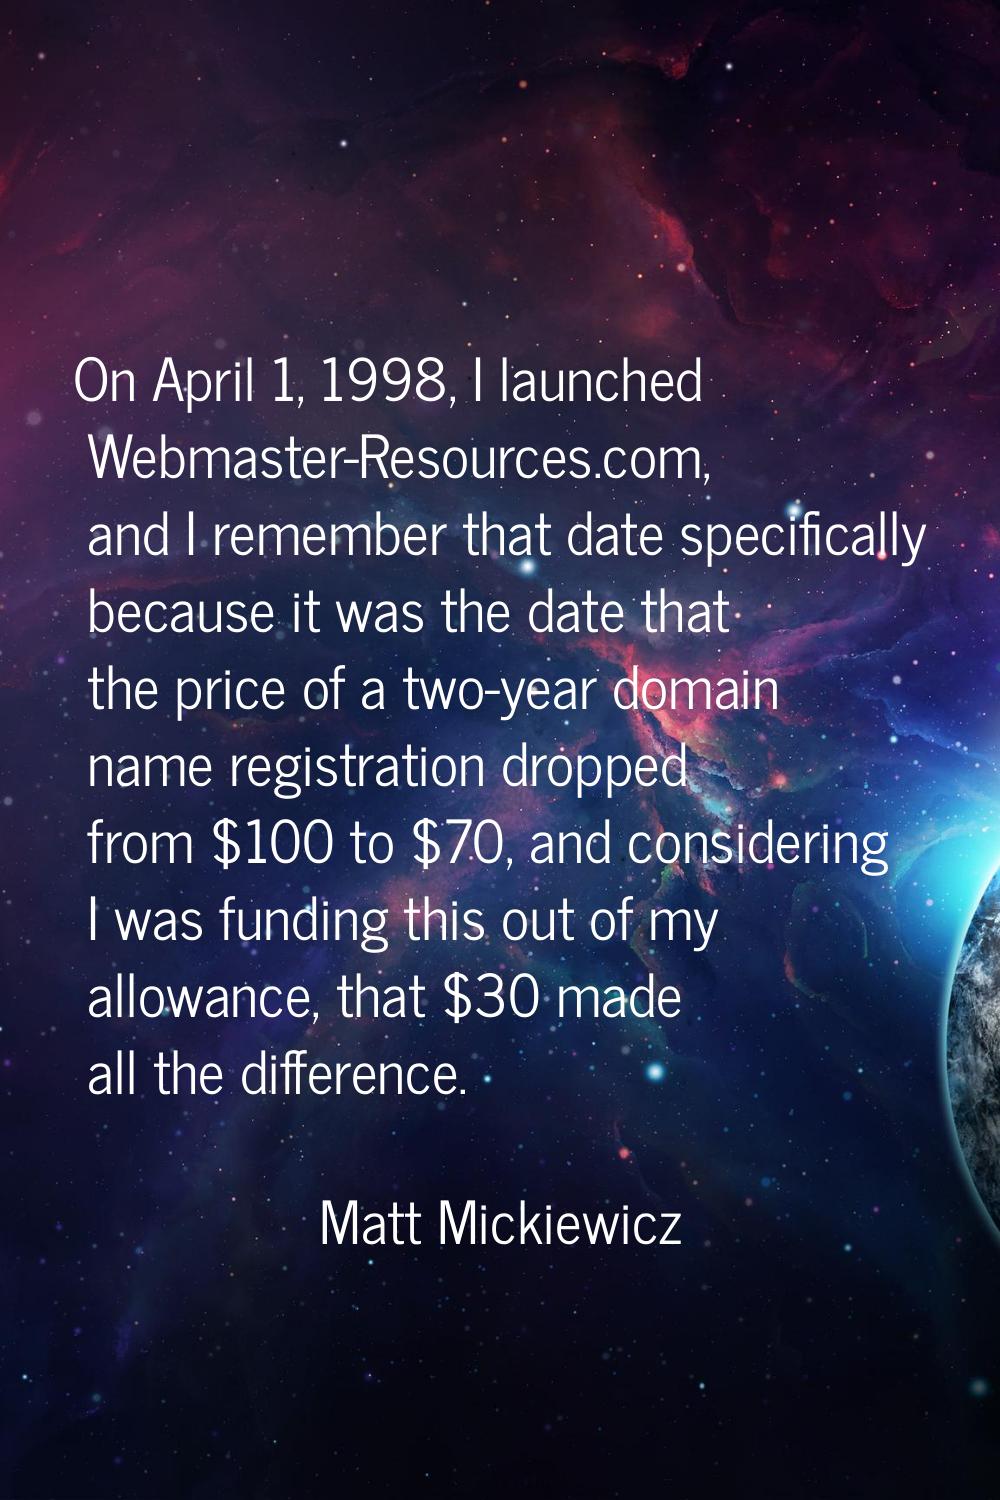 On April 1, 1998, I launched Webmaster-Resources.com, and I remember that date specifically because